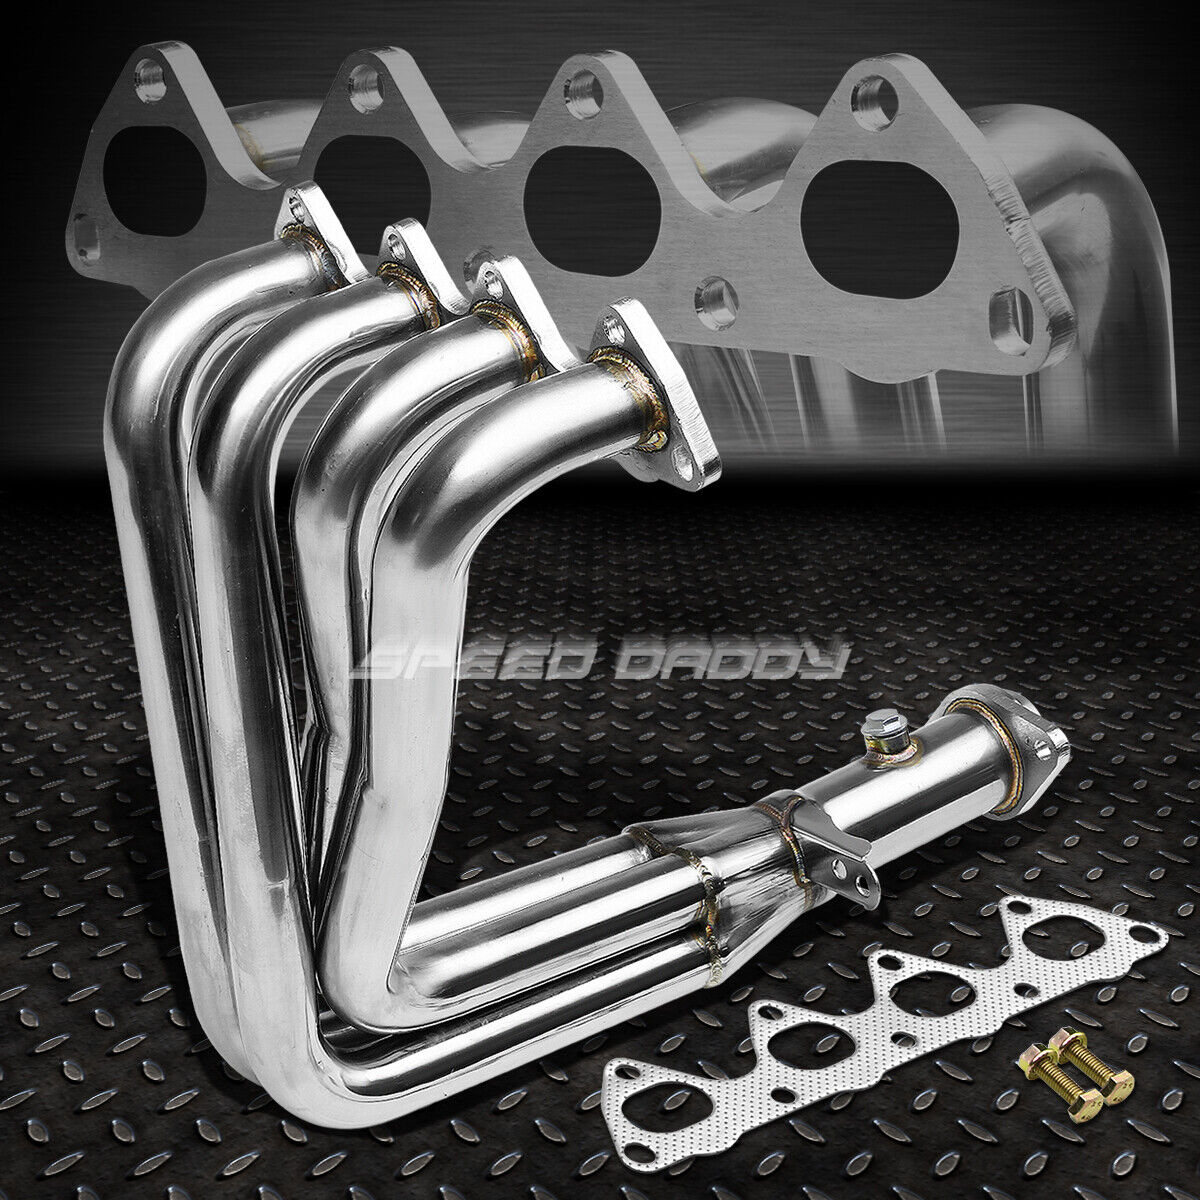 FOR INTEGRA GSR/TYPE-R CIVIC SI B18 4-1 STAINLESS STEEL EXHAUST HEADER MANIFOLD